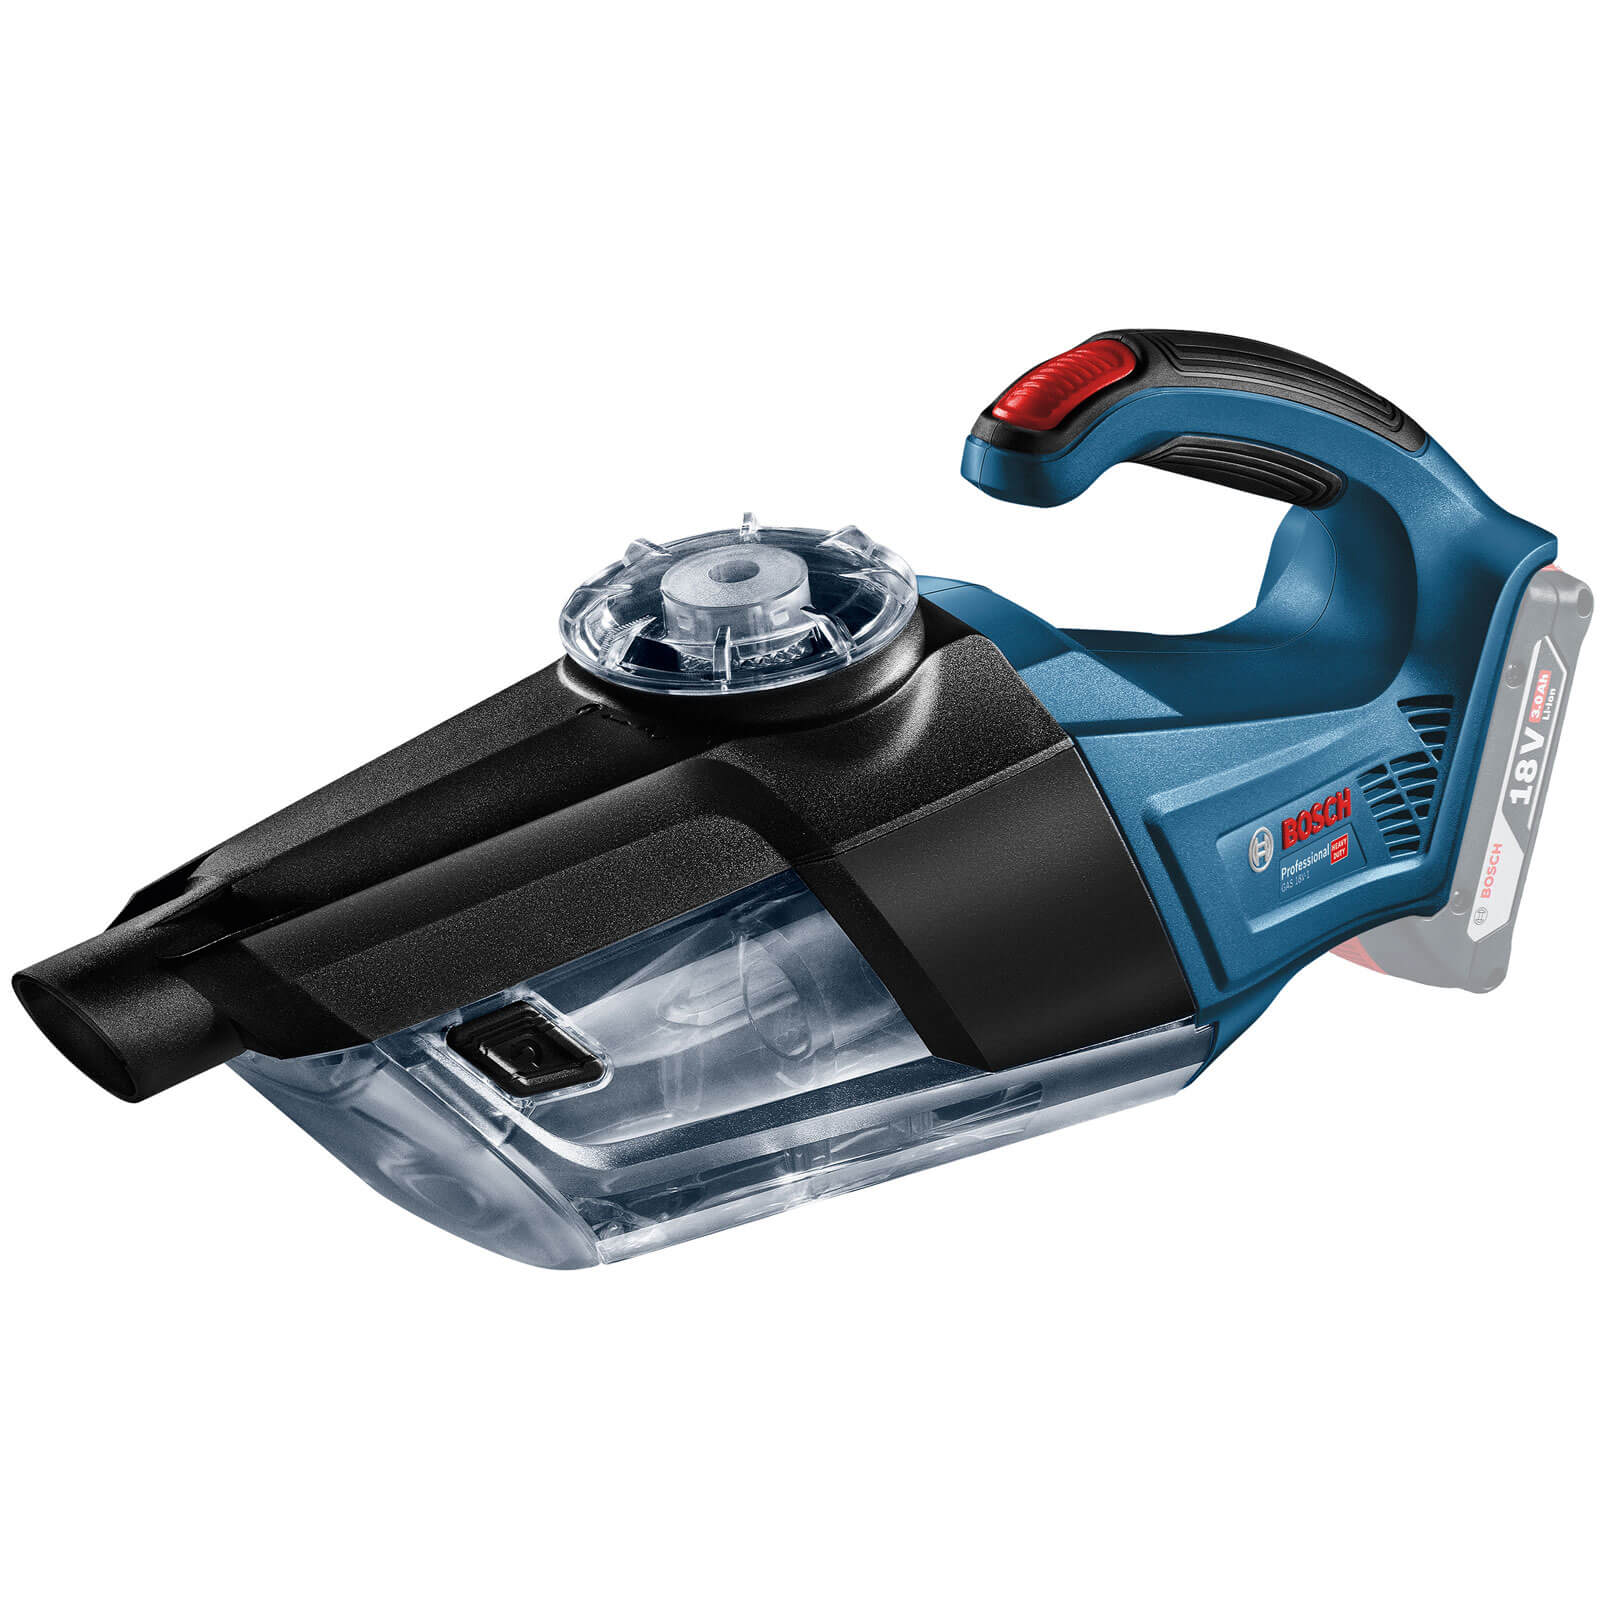 Bosch GAS 18 V-1 18v Cordless Hand Held Vacuum Cleaner No Batteries No Charger No Case